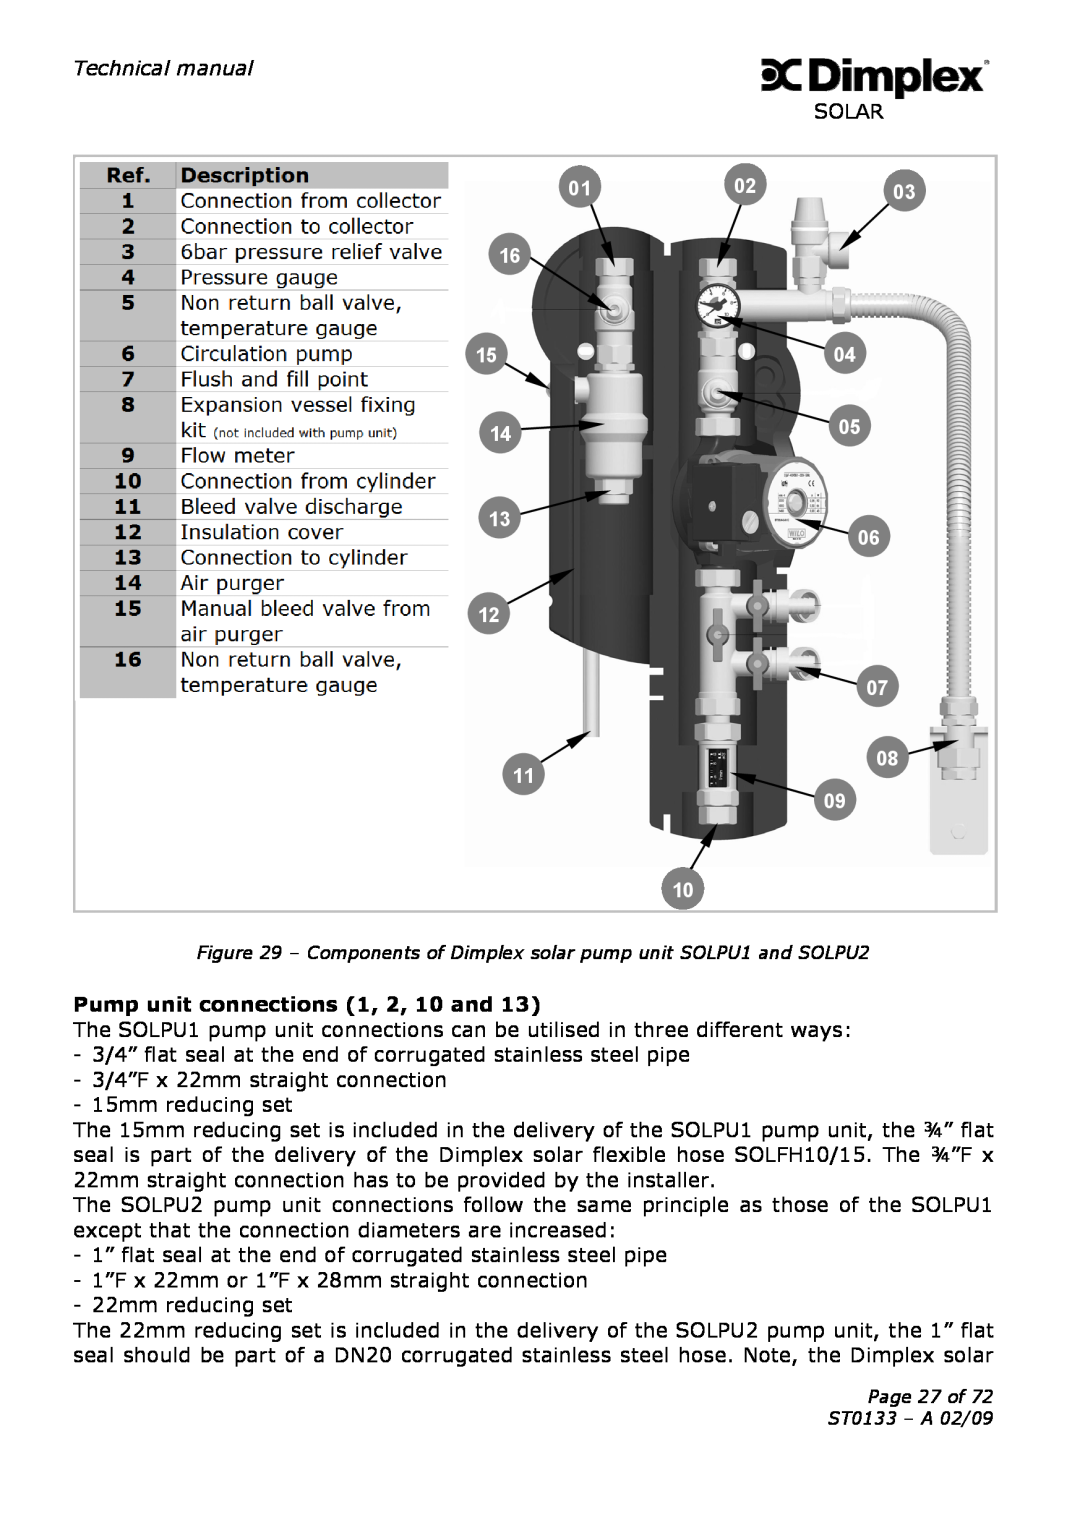 Dimplex technical manual Pump unit connections 1, 2, 10 and, 010203, 1504 1405, Page 27 of ST0133 - A 02/09 